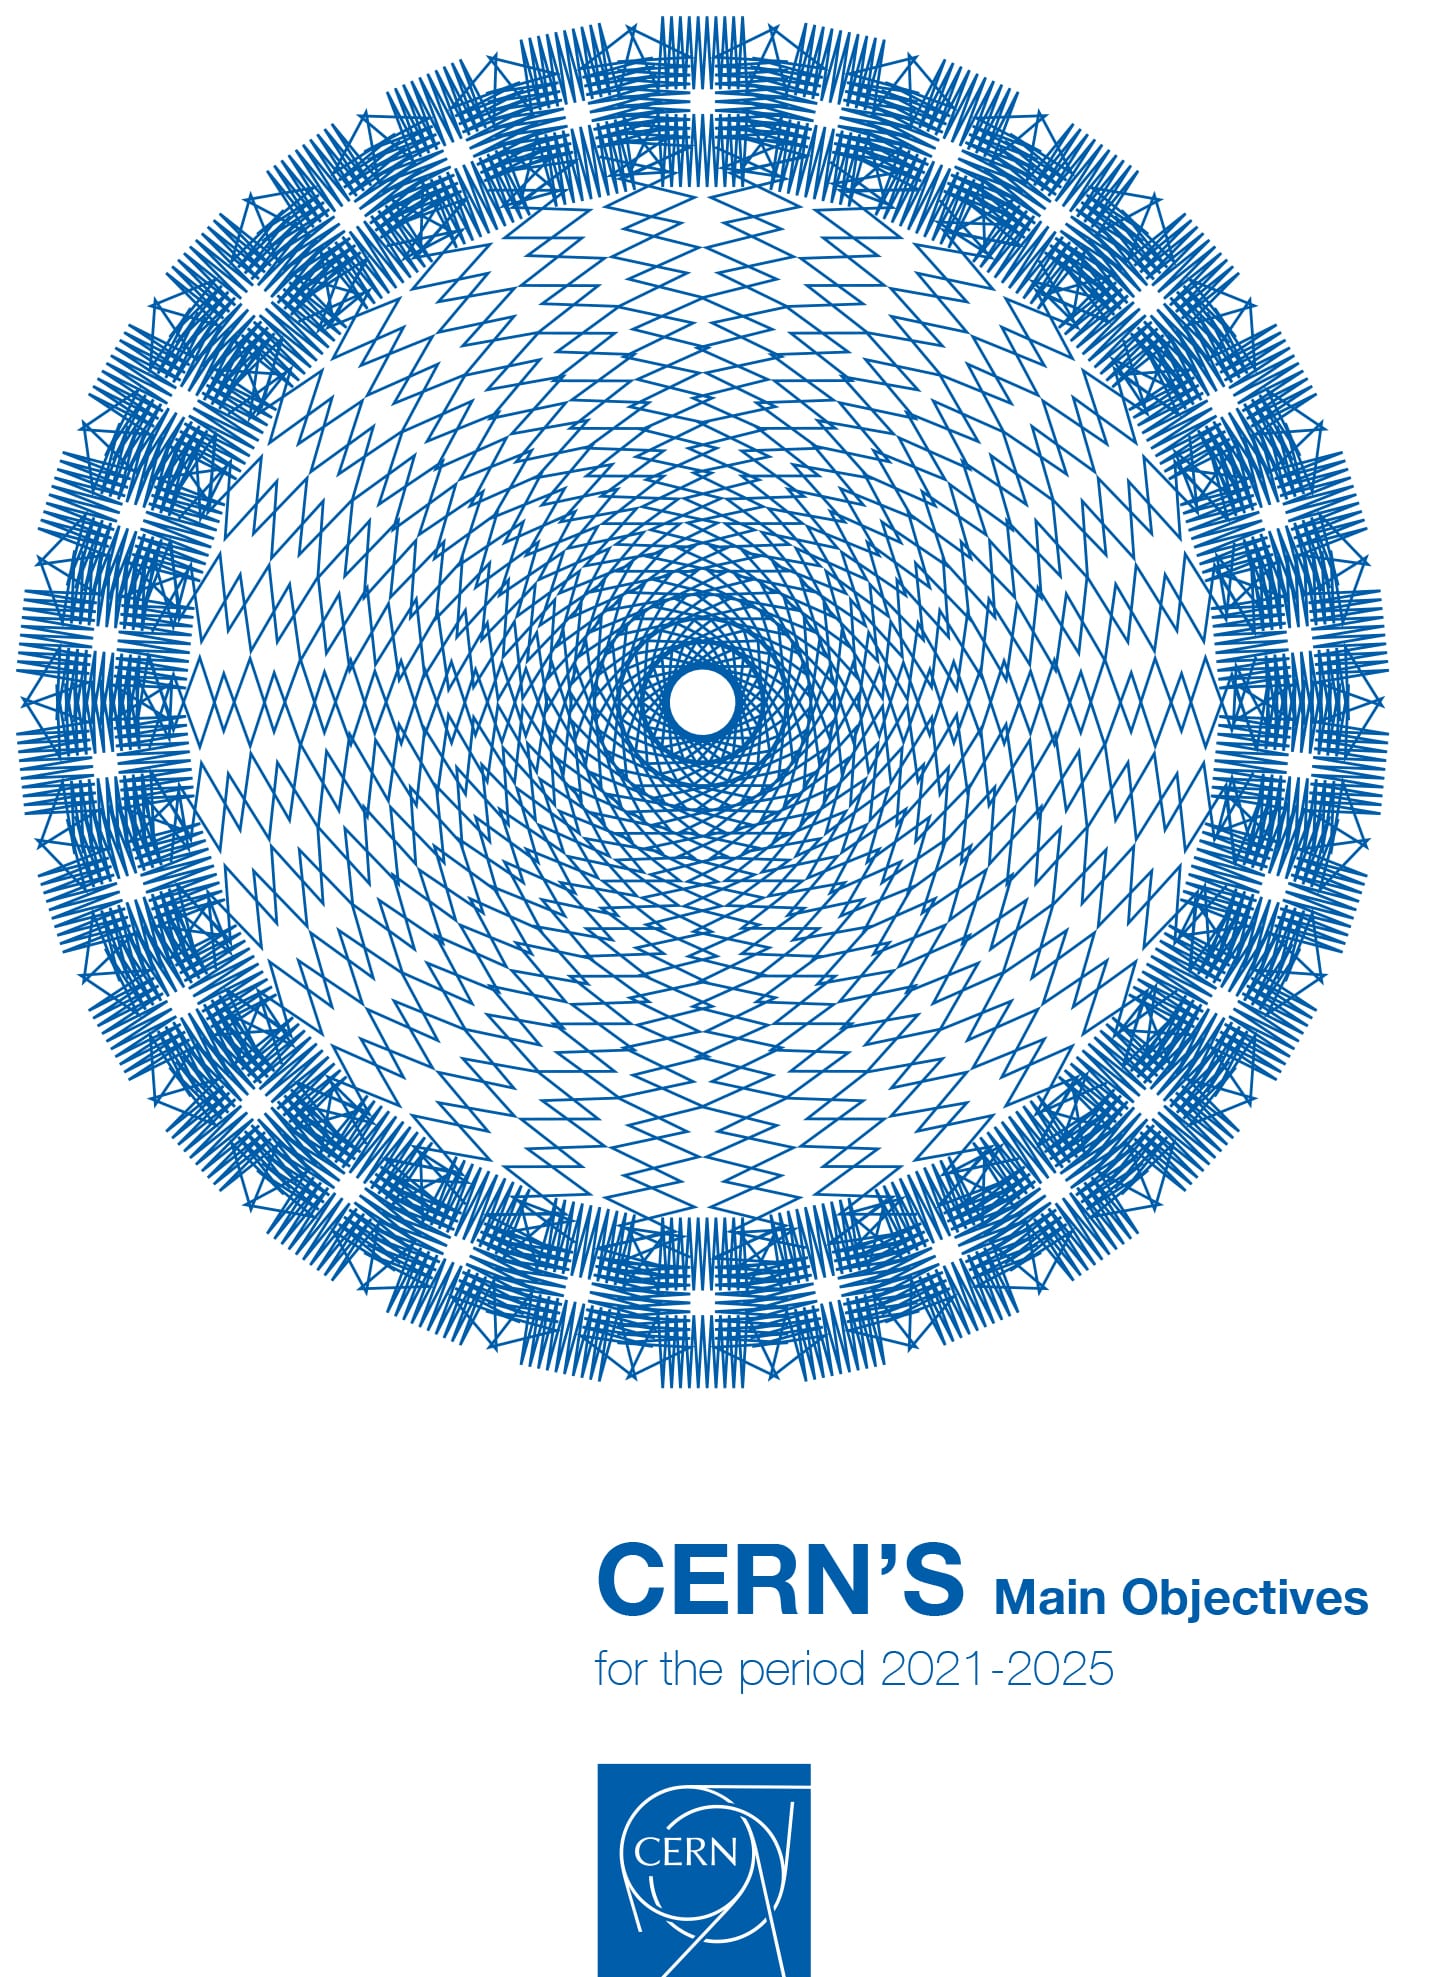 Front cover of CERN's Main Objectives brochure